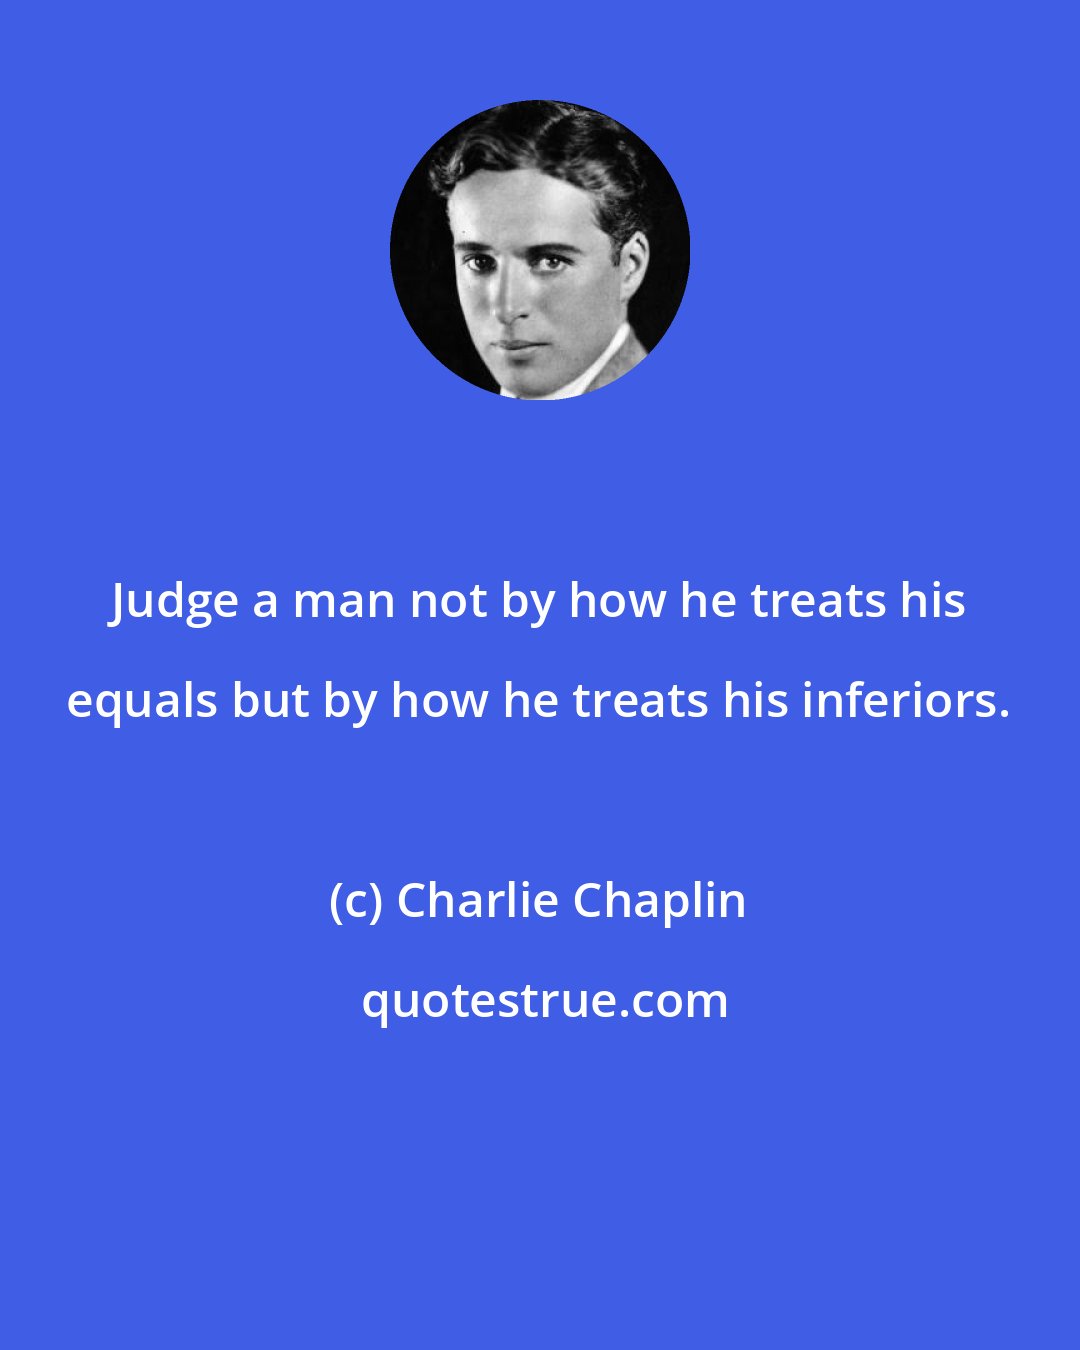 Charlie Chaplin: Judge a man not by how he treats his equals but by how he treats his inferiors.